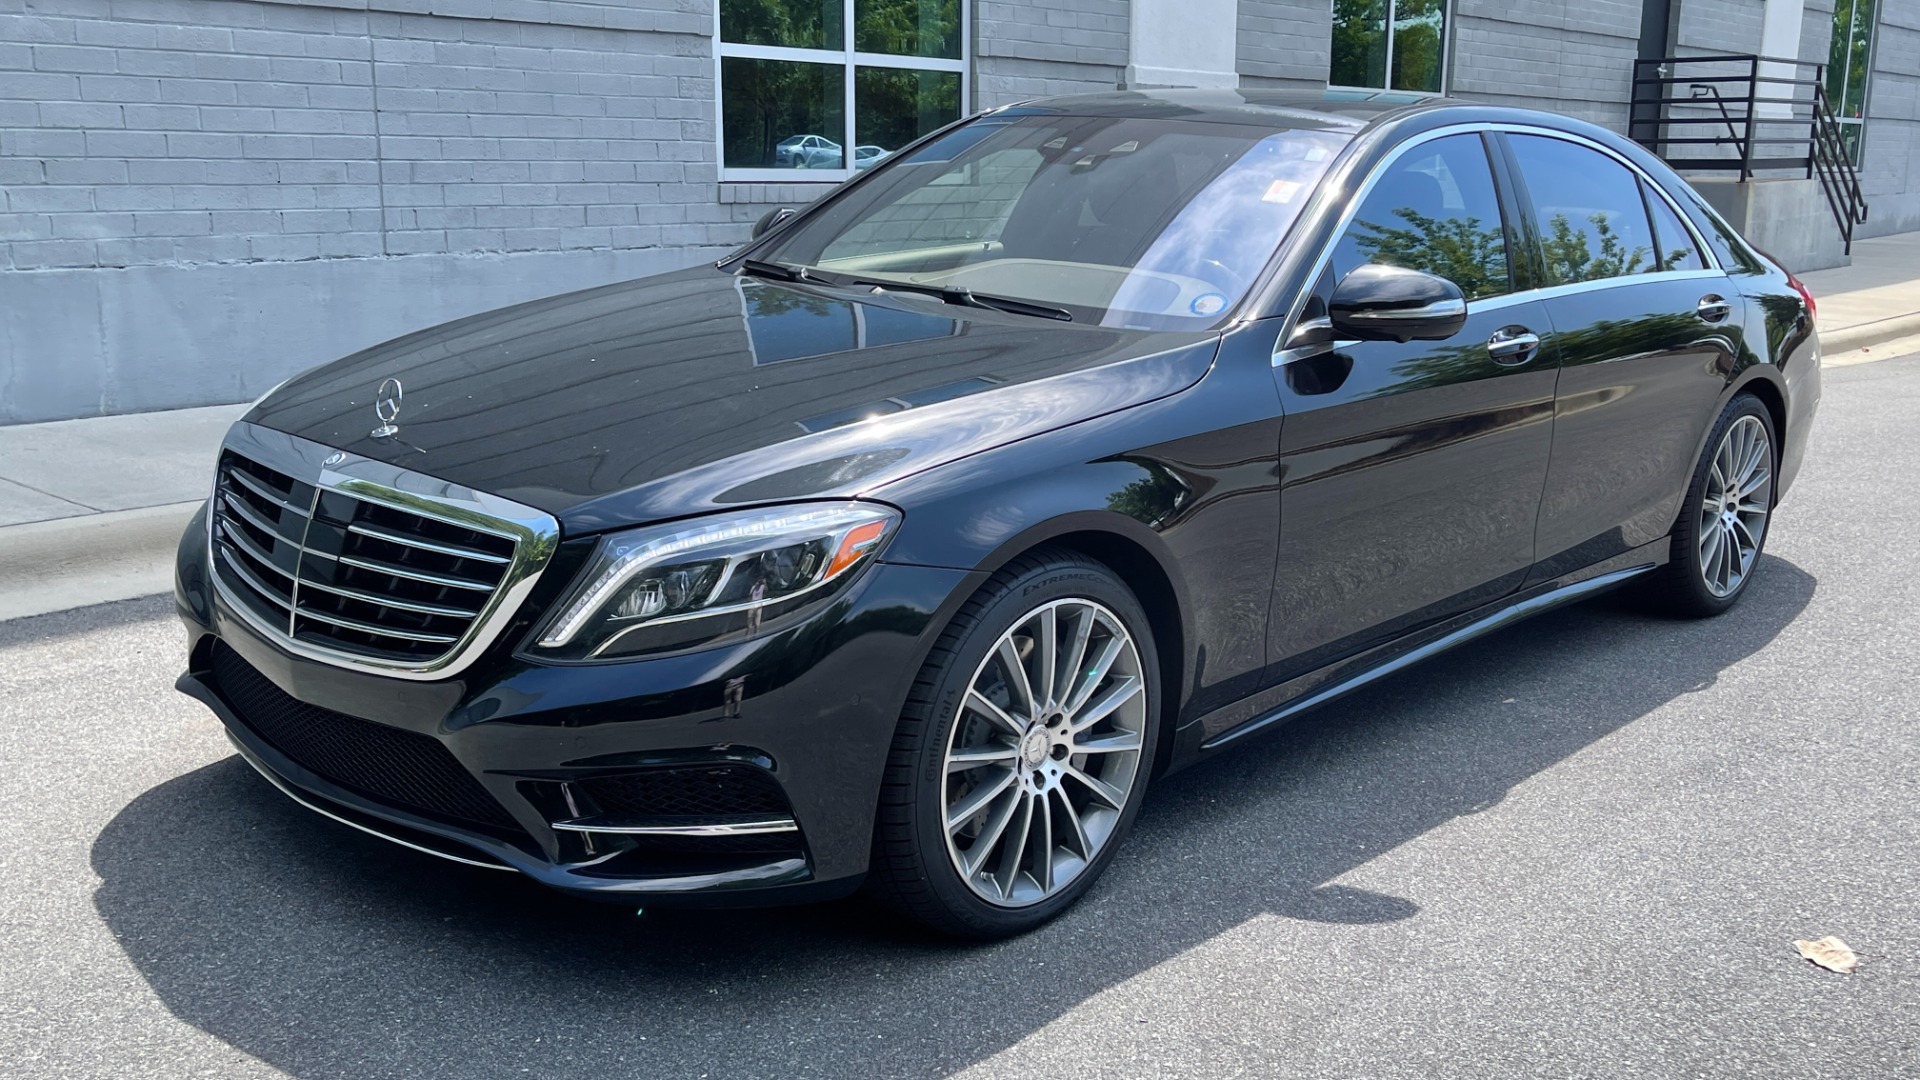 Used 2015 Mercedes-Benz S-Class S550 / 20IN AMG WHEELS / SPORT / COMFORT / PREMIUM / DRIVER ASSIST for sale $38,595 at Formula Imports in Charlotte NC 28227 5